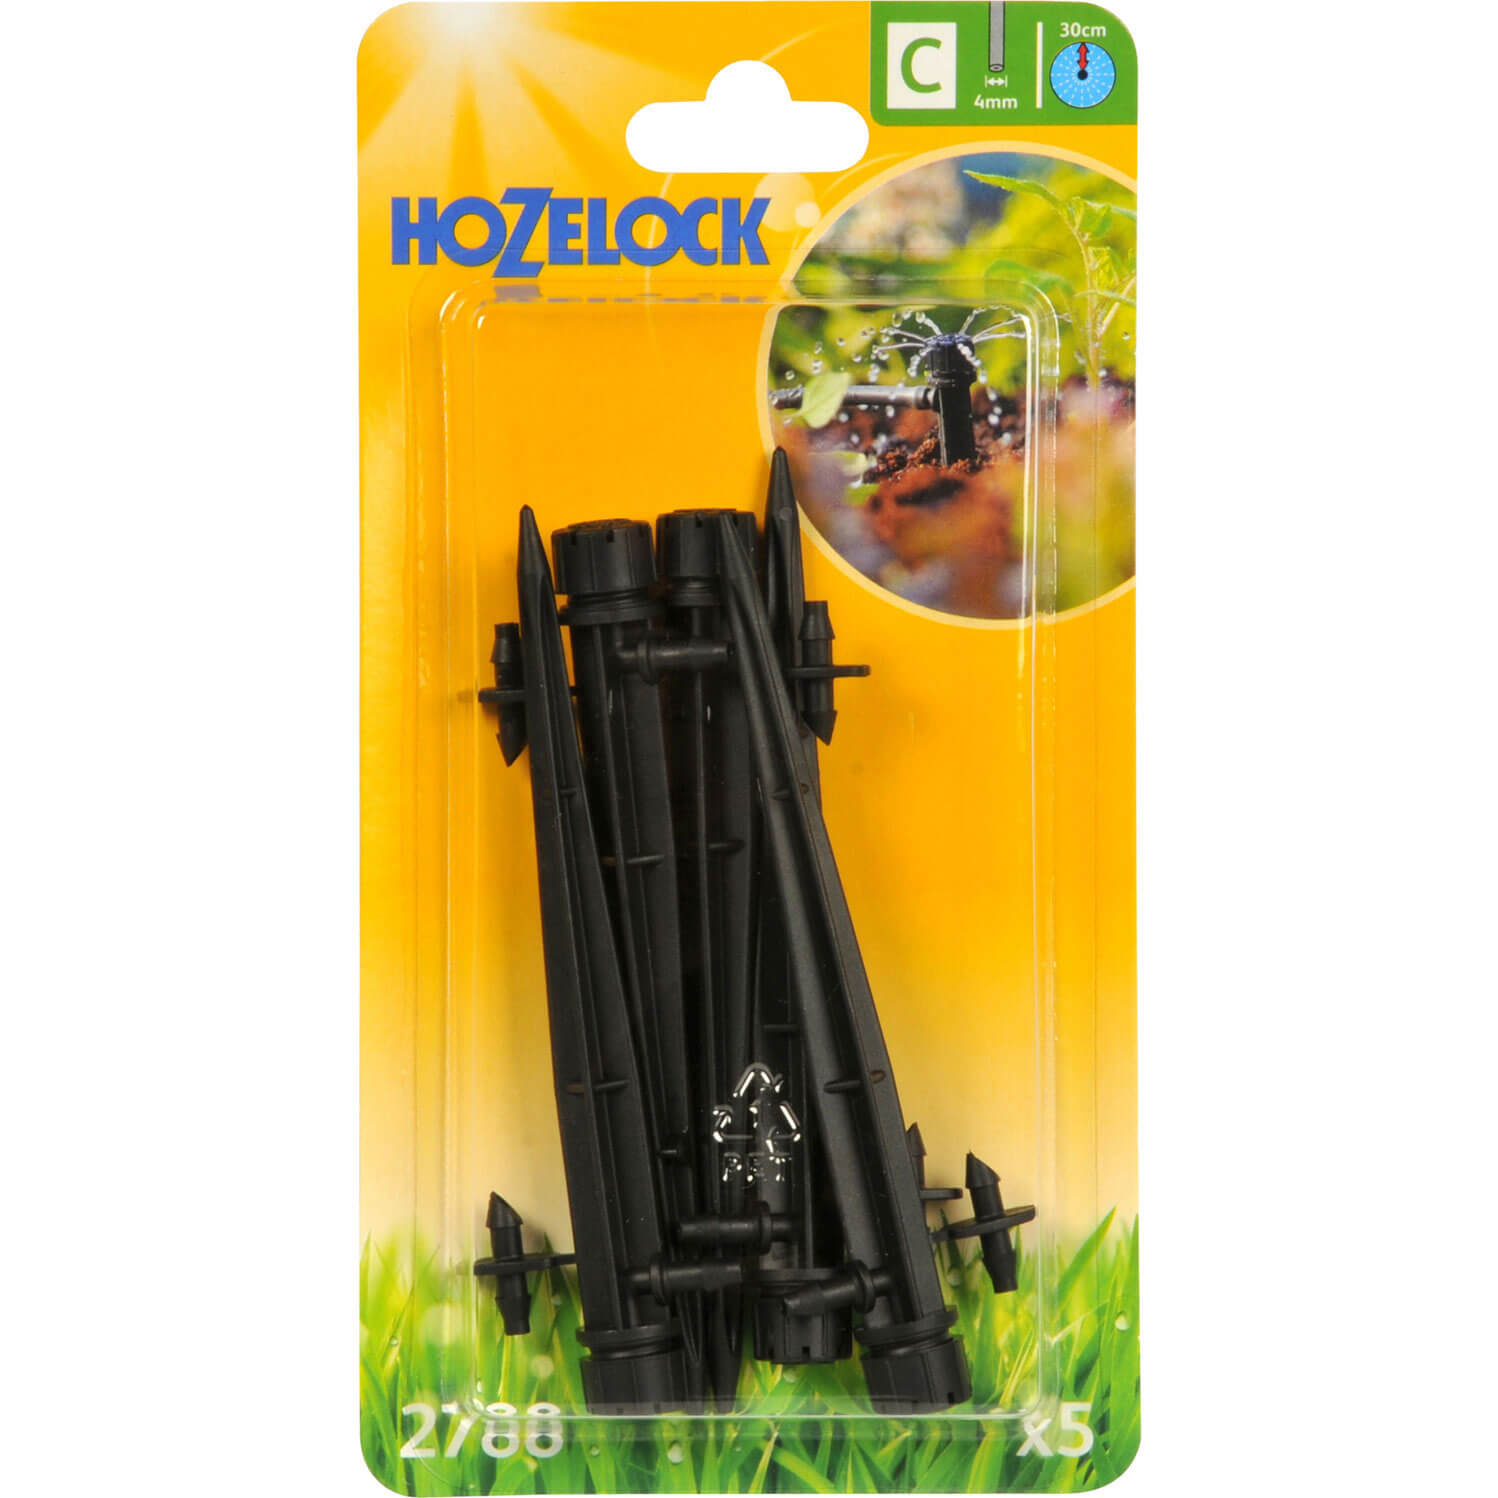 Hozelock End of Line Adjustable Mini Garden Water Sprinkler on Stake Contains 5